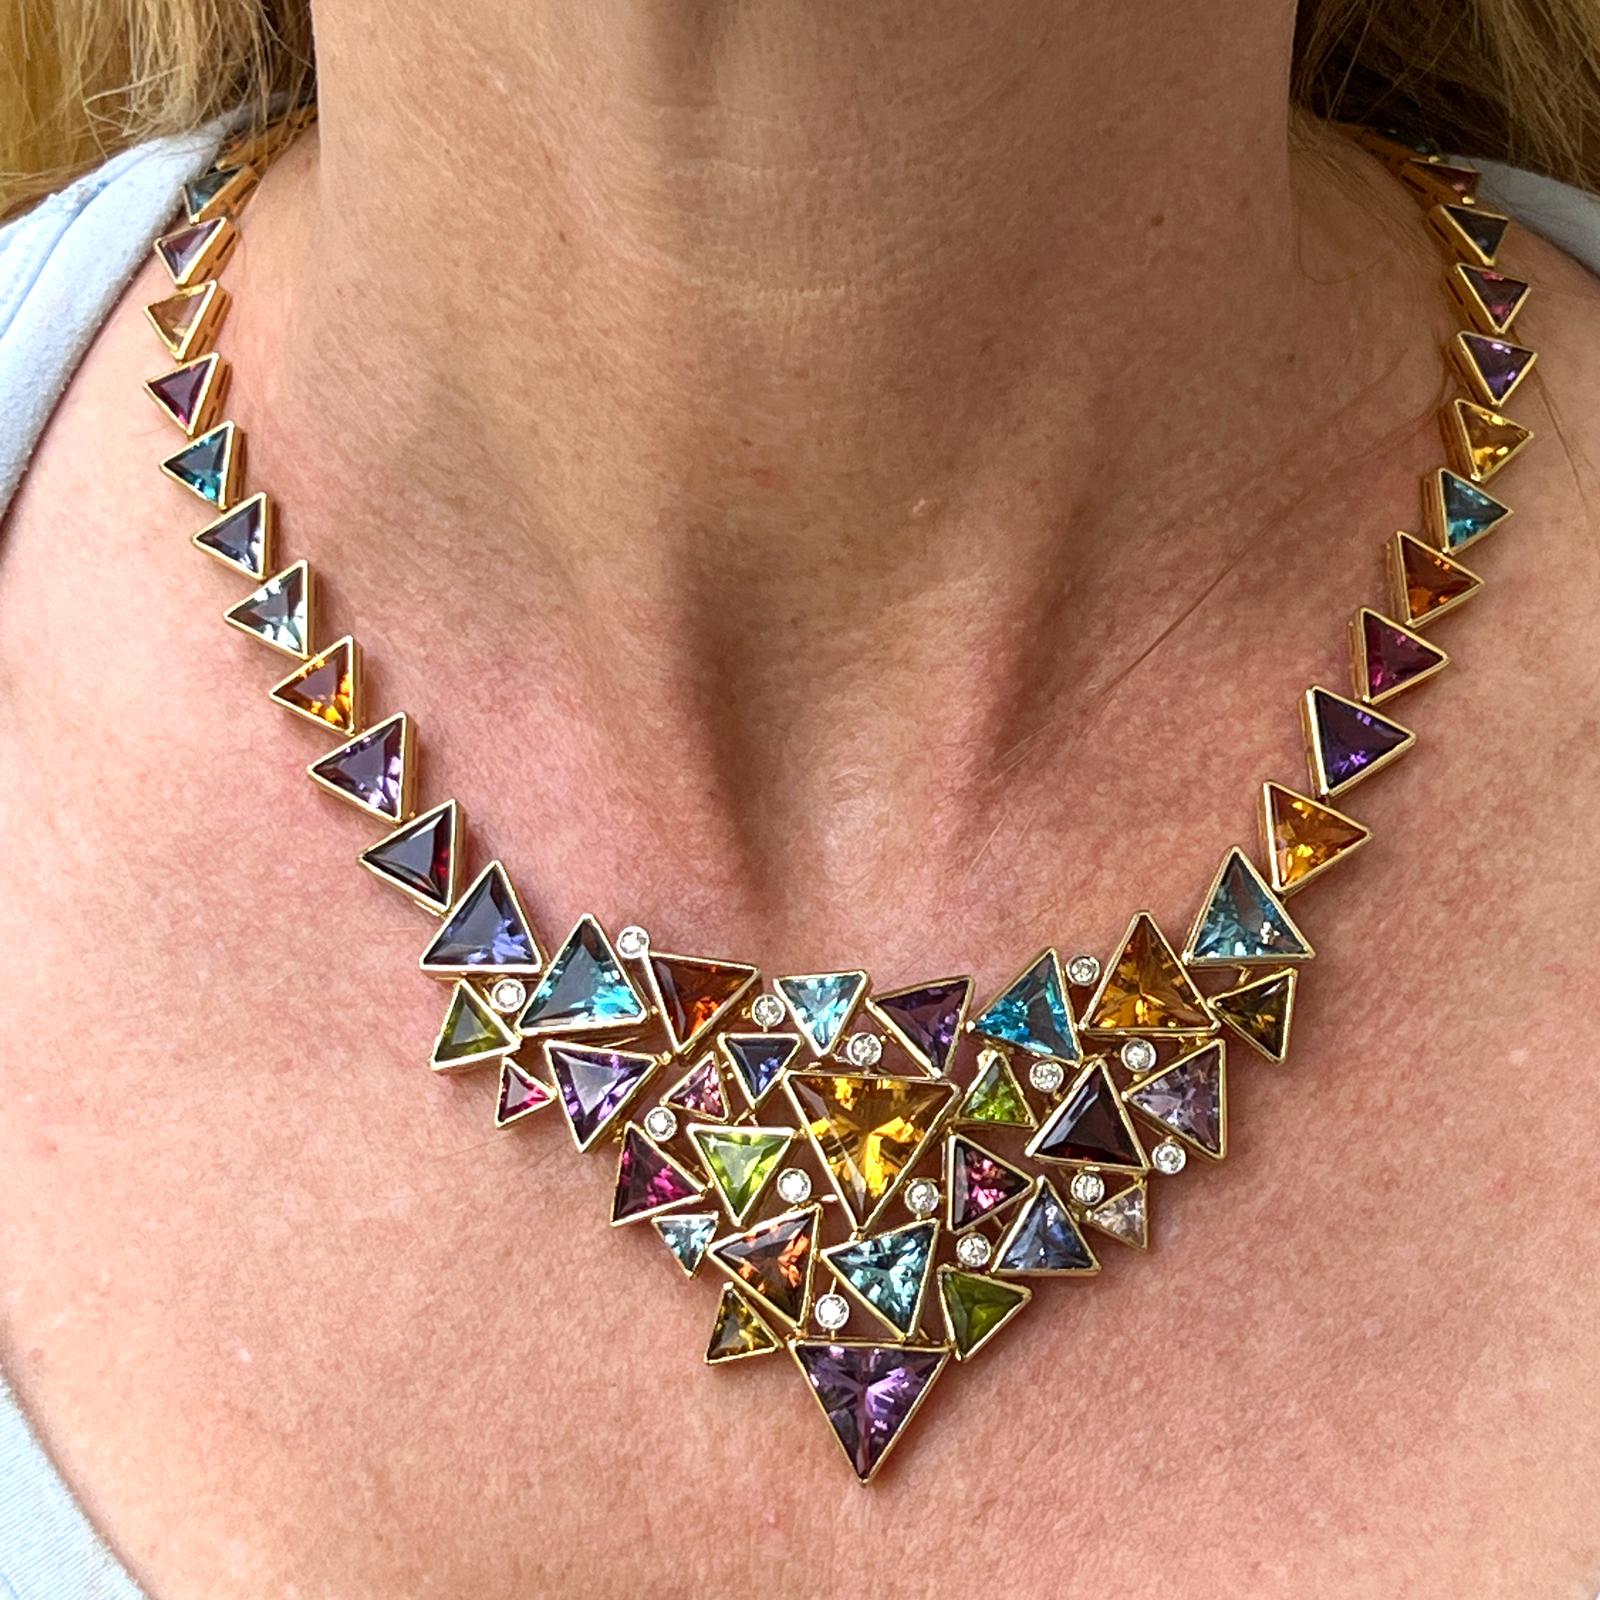 Fabulous and colorful bib link necklace crafted in 18 karat yellow gold. The necklace features multi-color citrine, amethyst, peridot, and topaz gesmtones and 14 round brilliant cut diamonds weighing approximately 1.40 CTW. The diamonds are graded